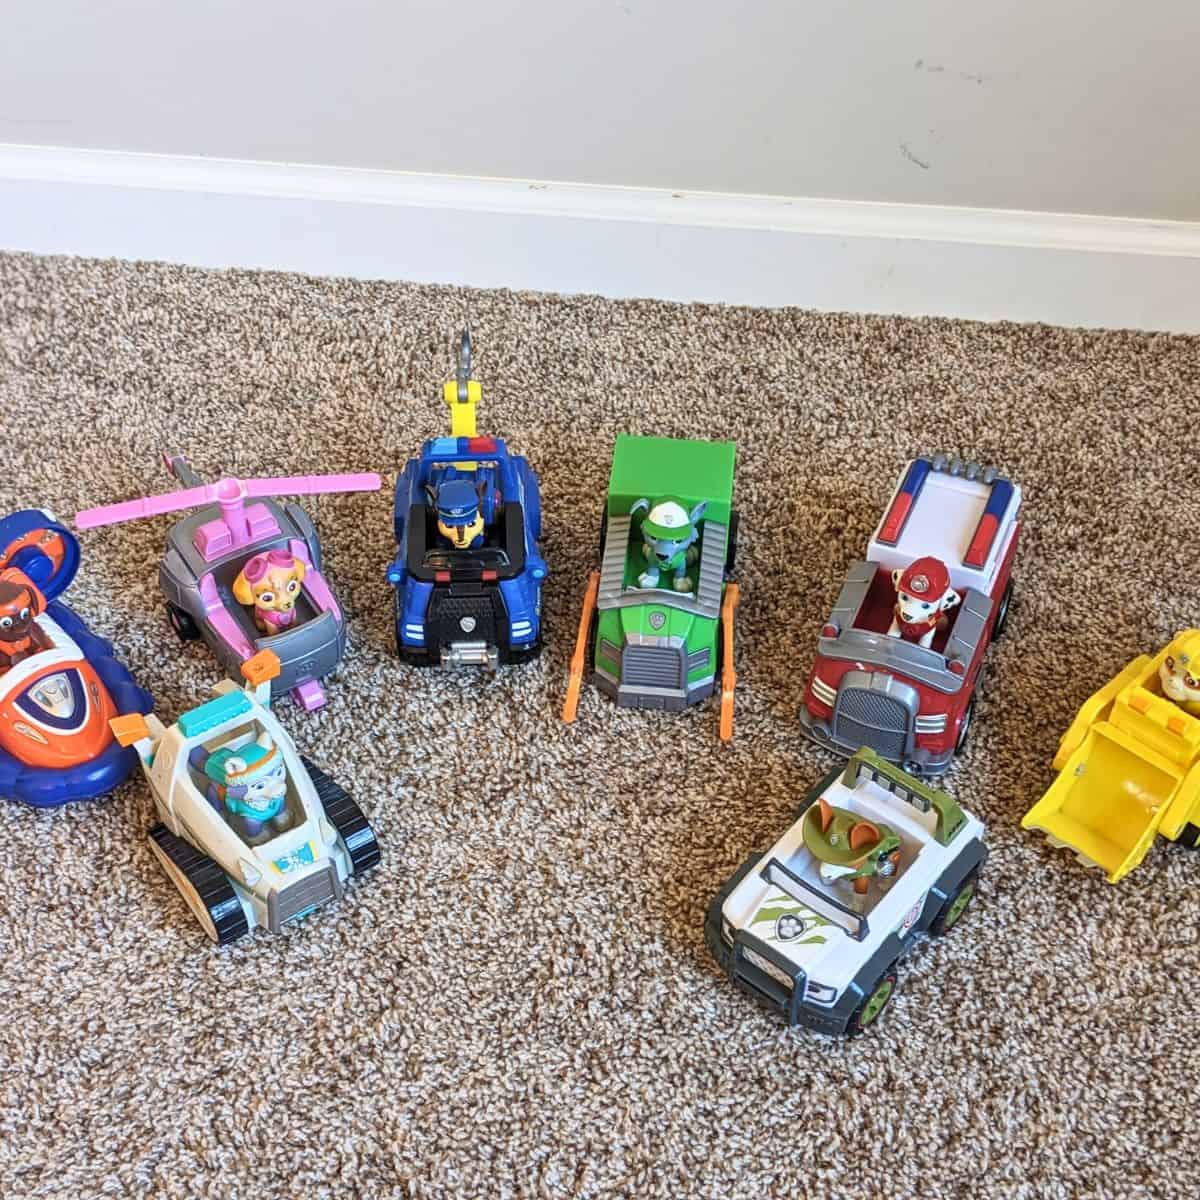 Lineup of Paw Patrol action figures and vehicles.